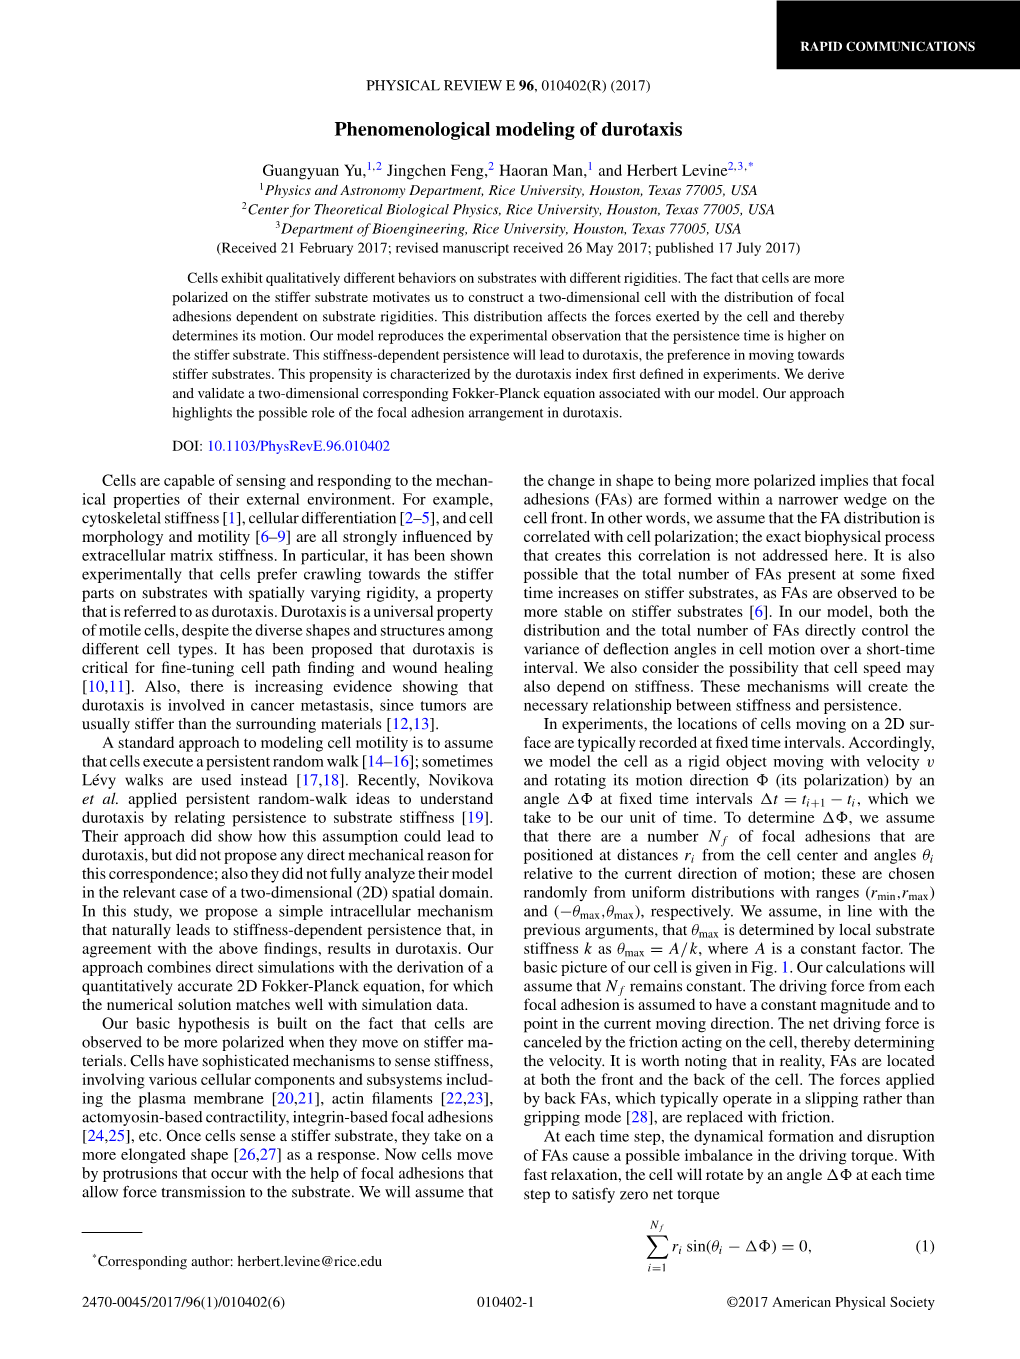 Phenomenological Modeling of Durotaxis